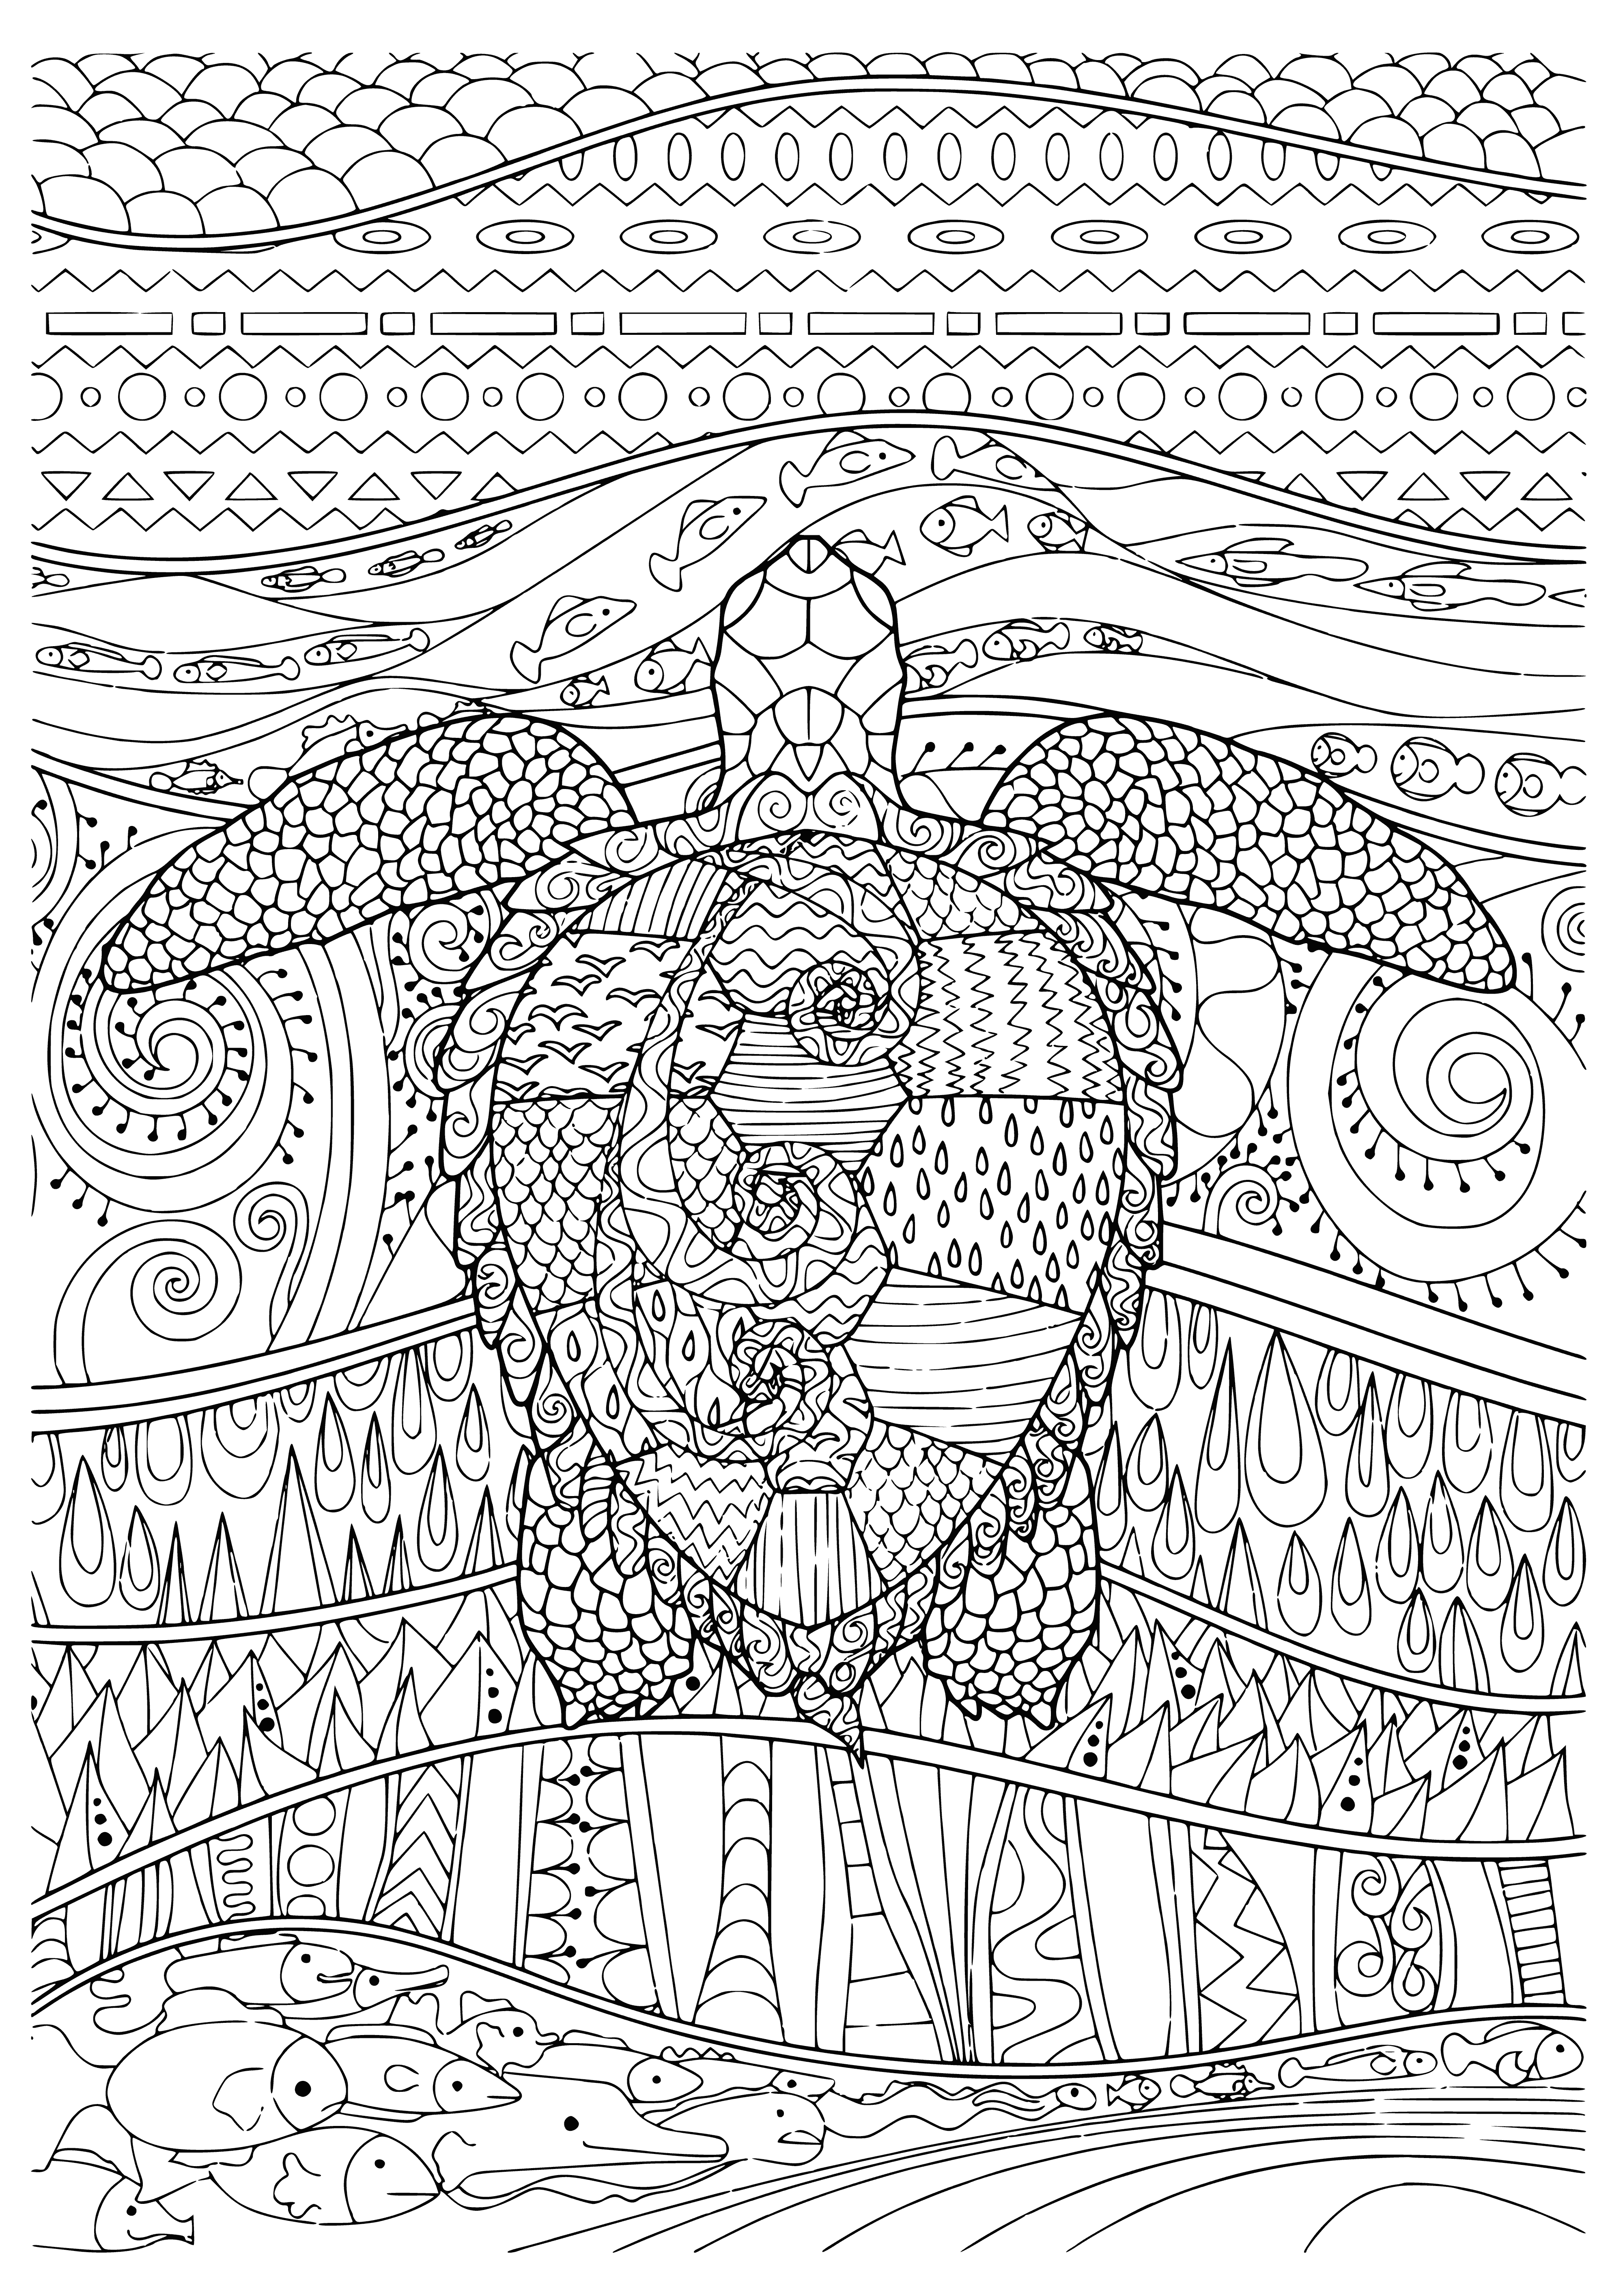 Sea turtle coloring page